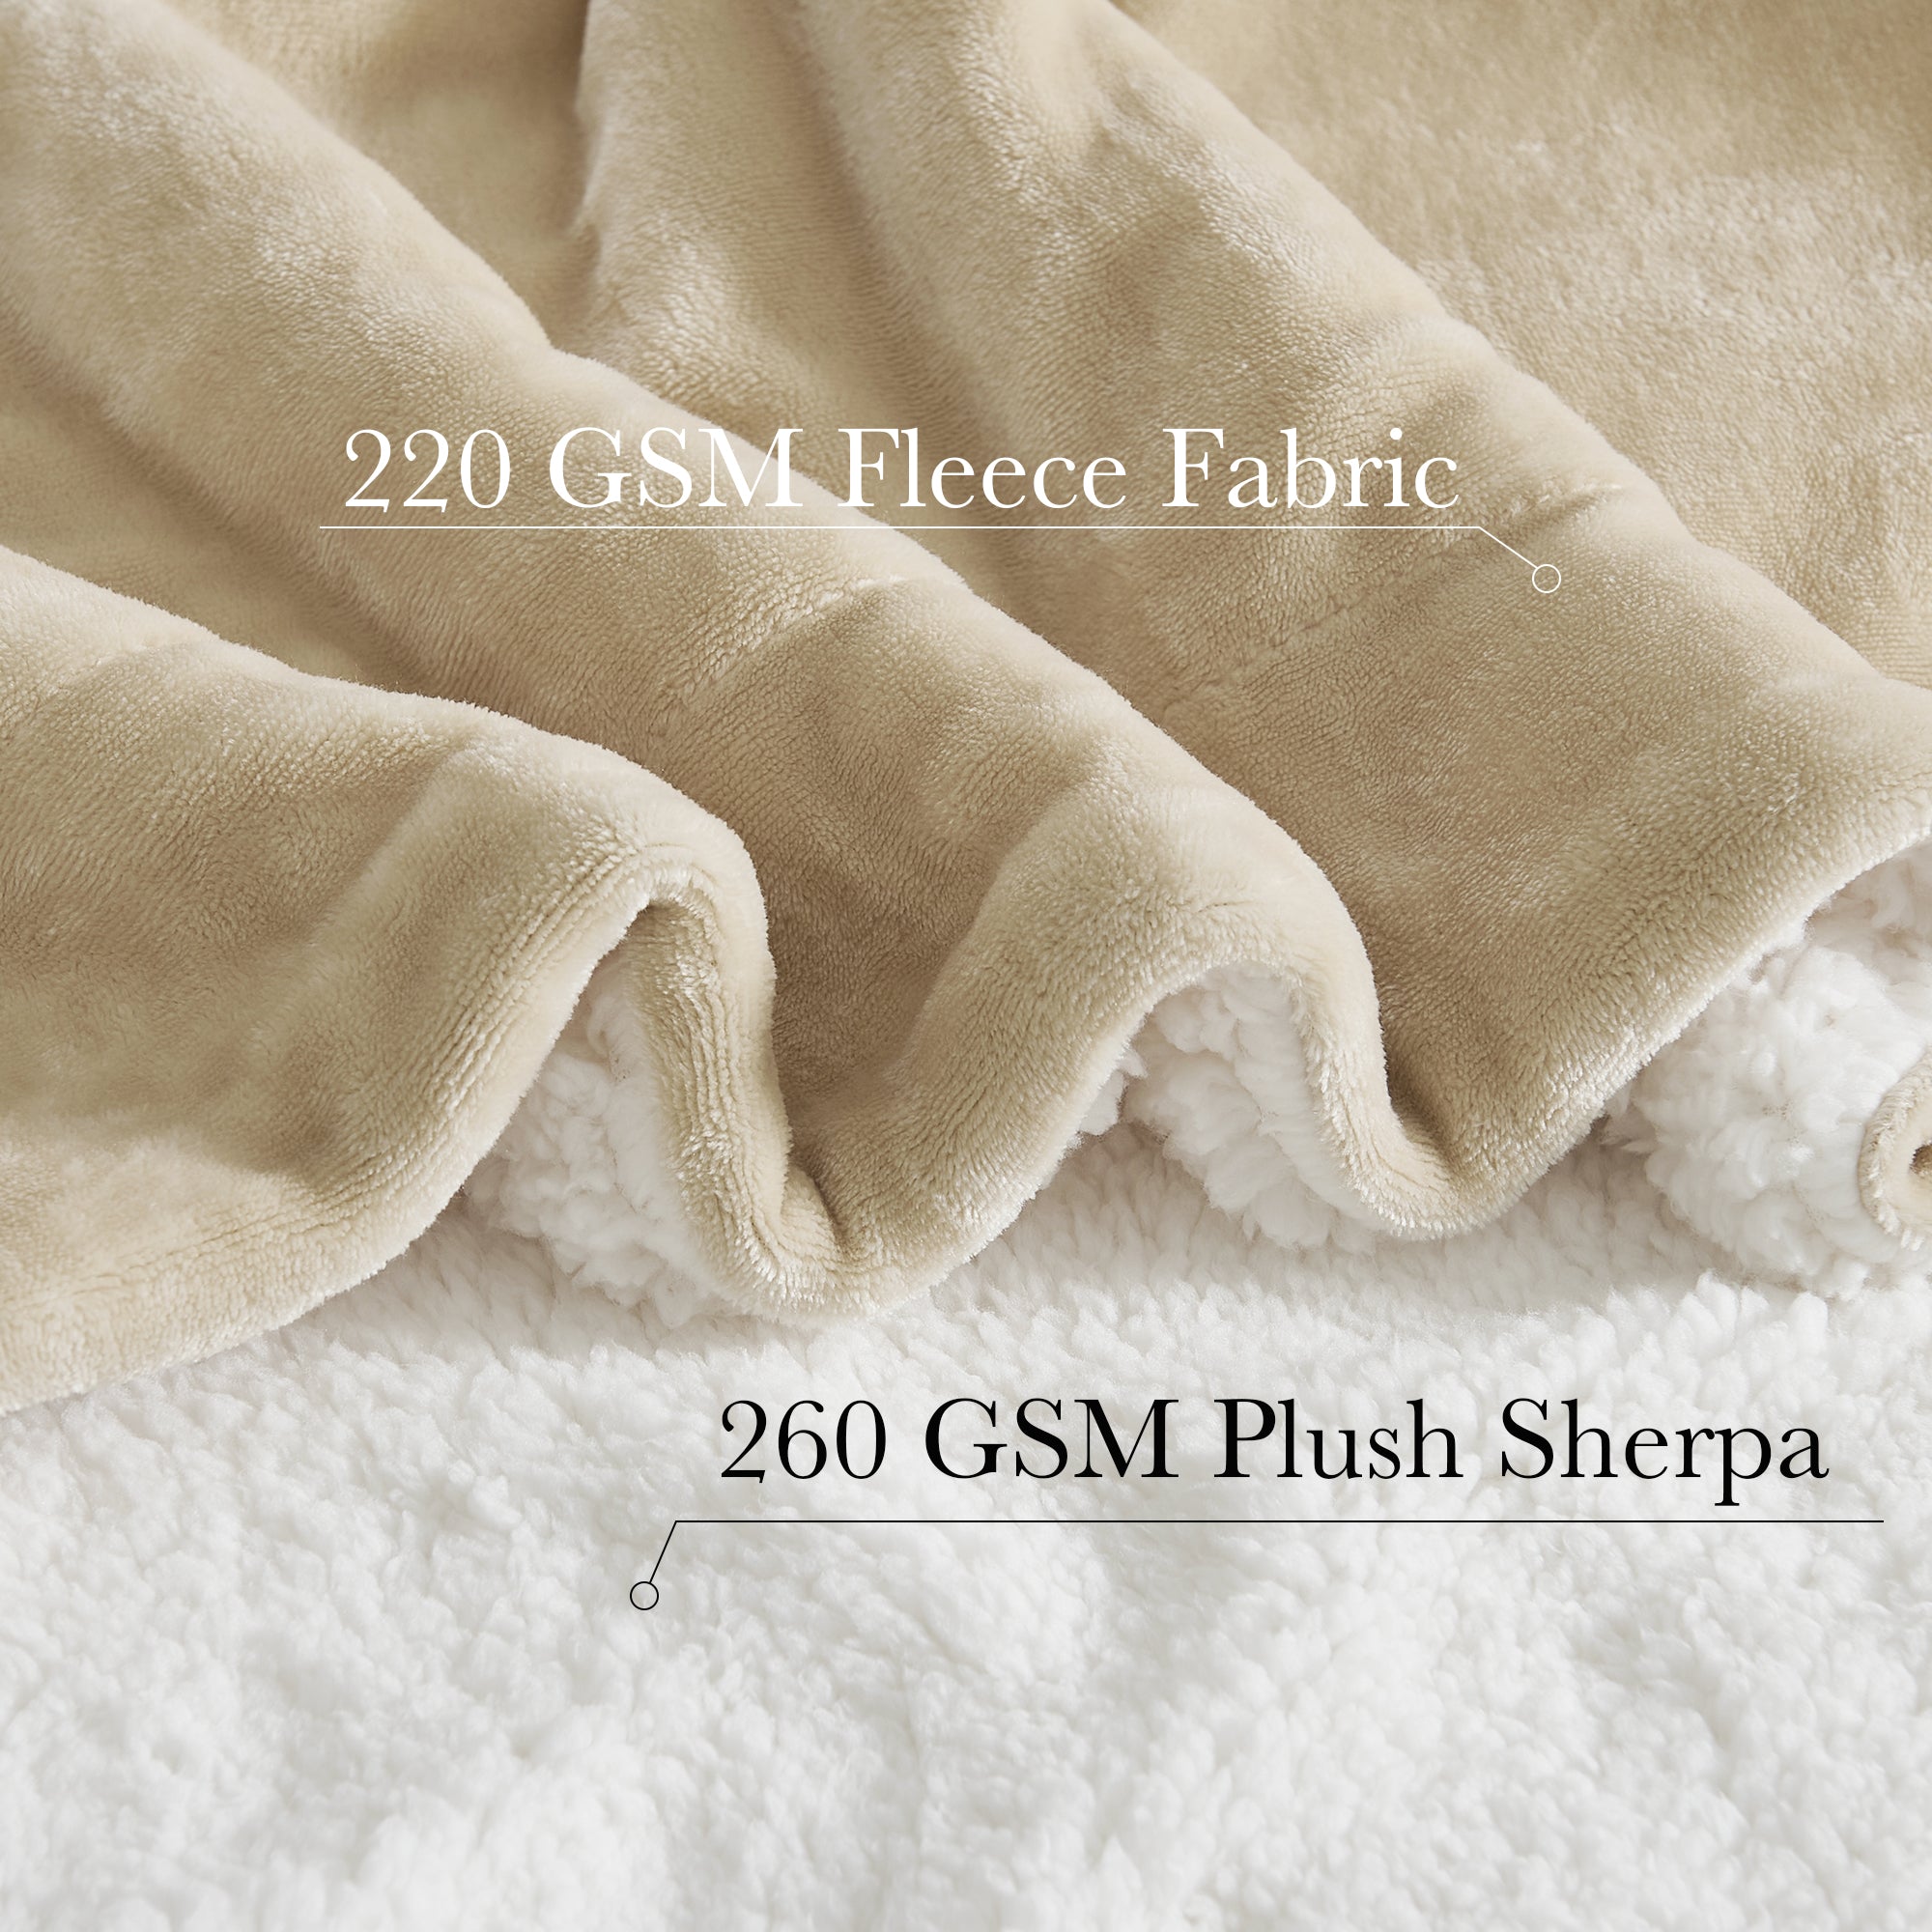 KGORGE Dual Sided Warm Thick Plush Blankets Super Soft Sherpa Blanket for Bed Sofa Chair Travel KGORGE Store